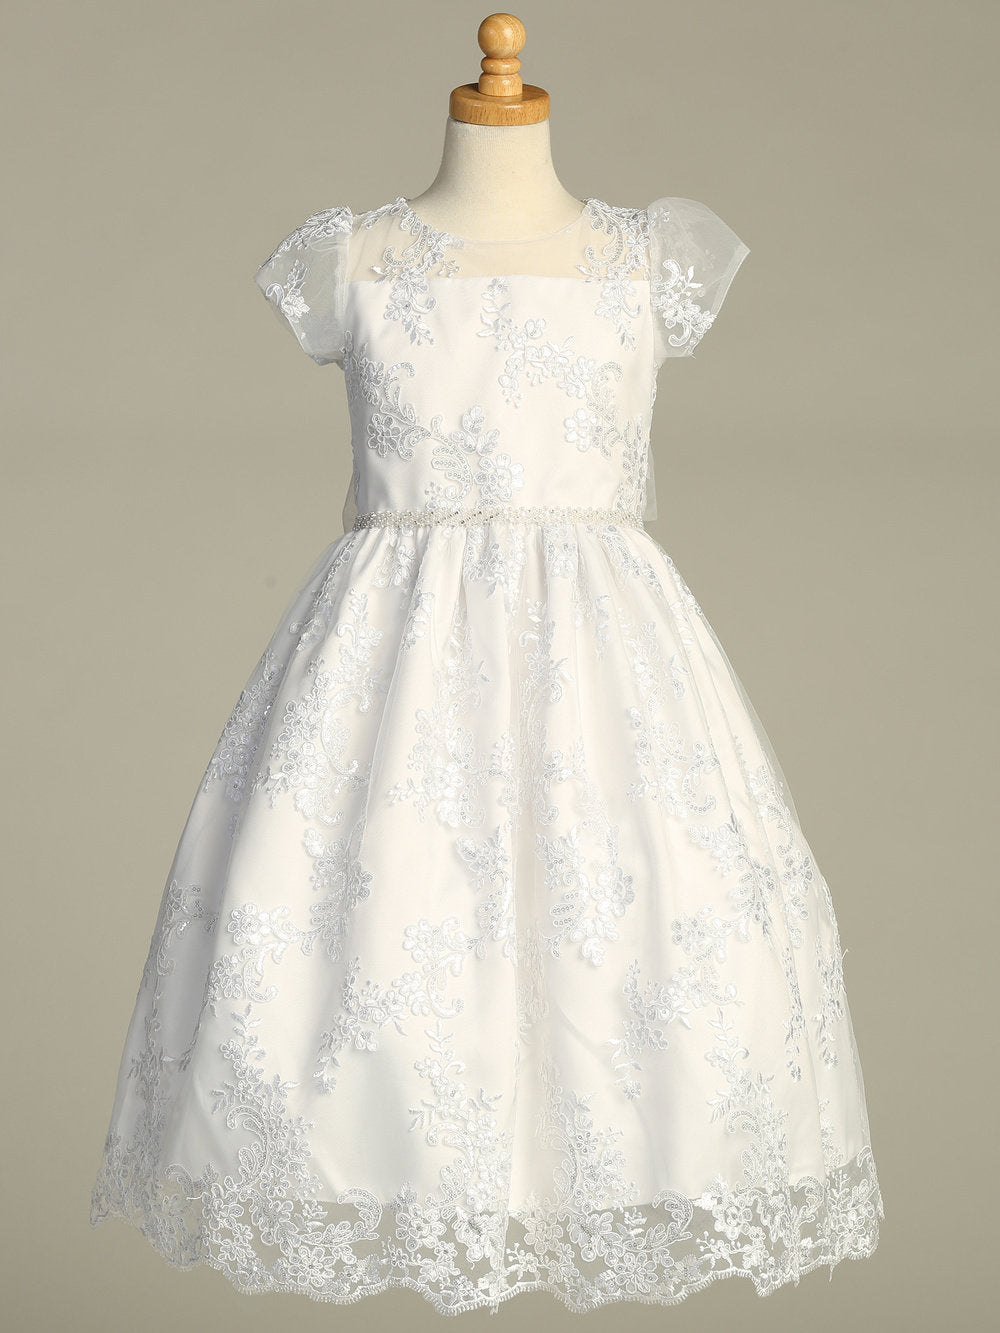 A full-length view of the First Communion Dress showing the elegant silhouette and embroidered tulle with sequins.